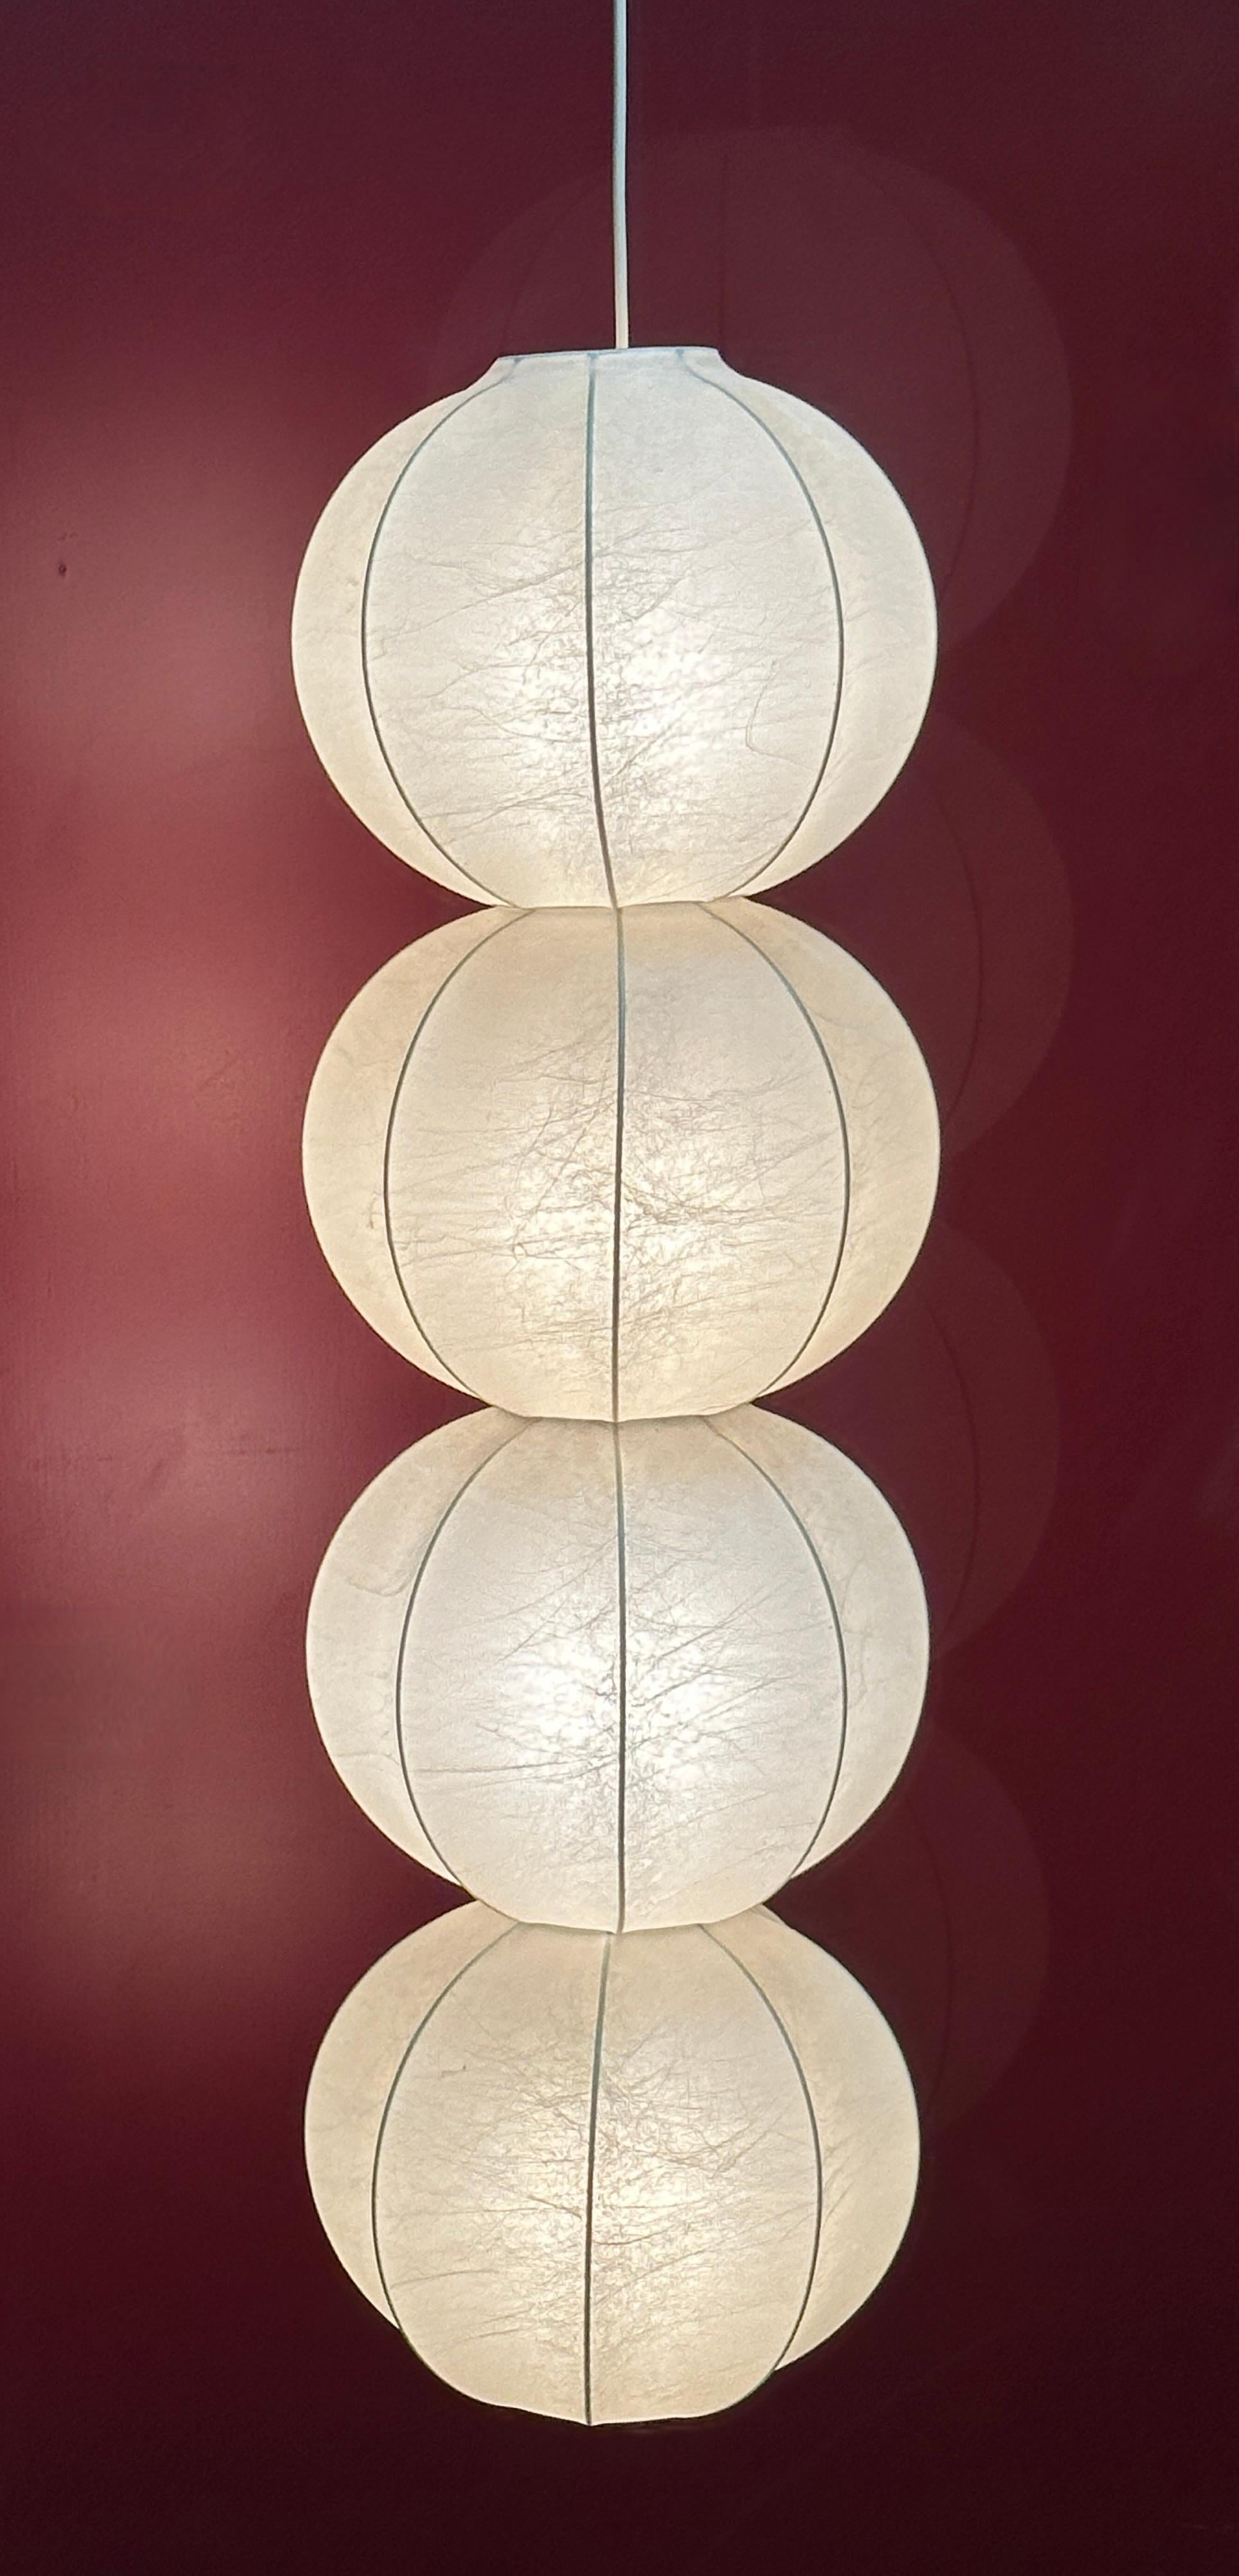 goldkant cocoon lamp